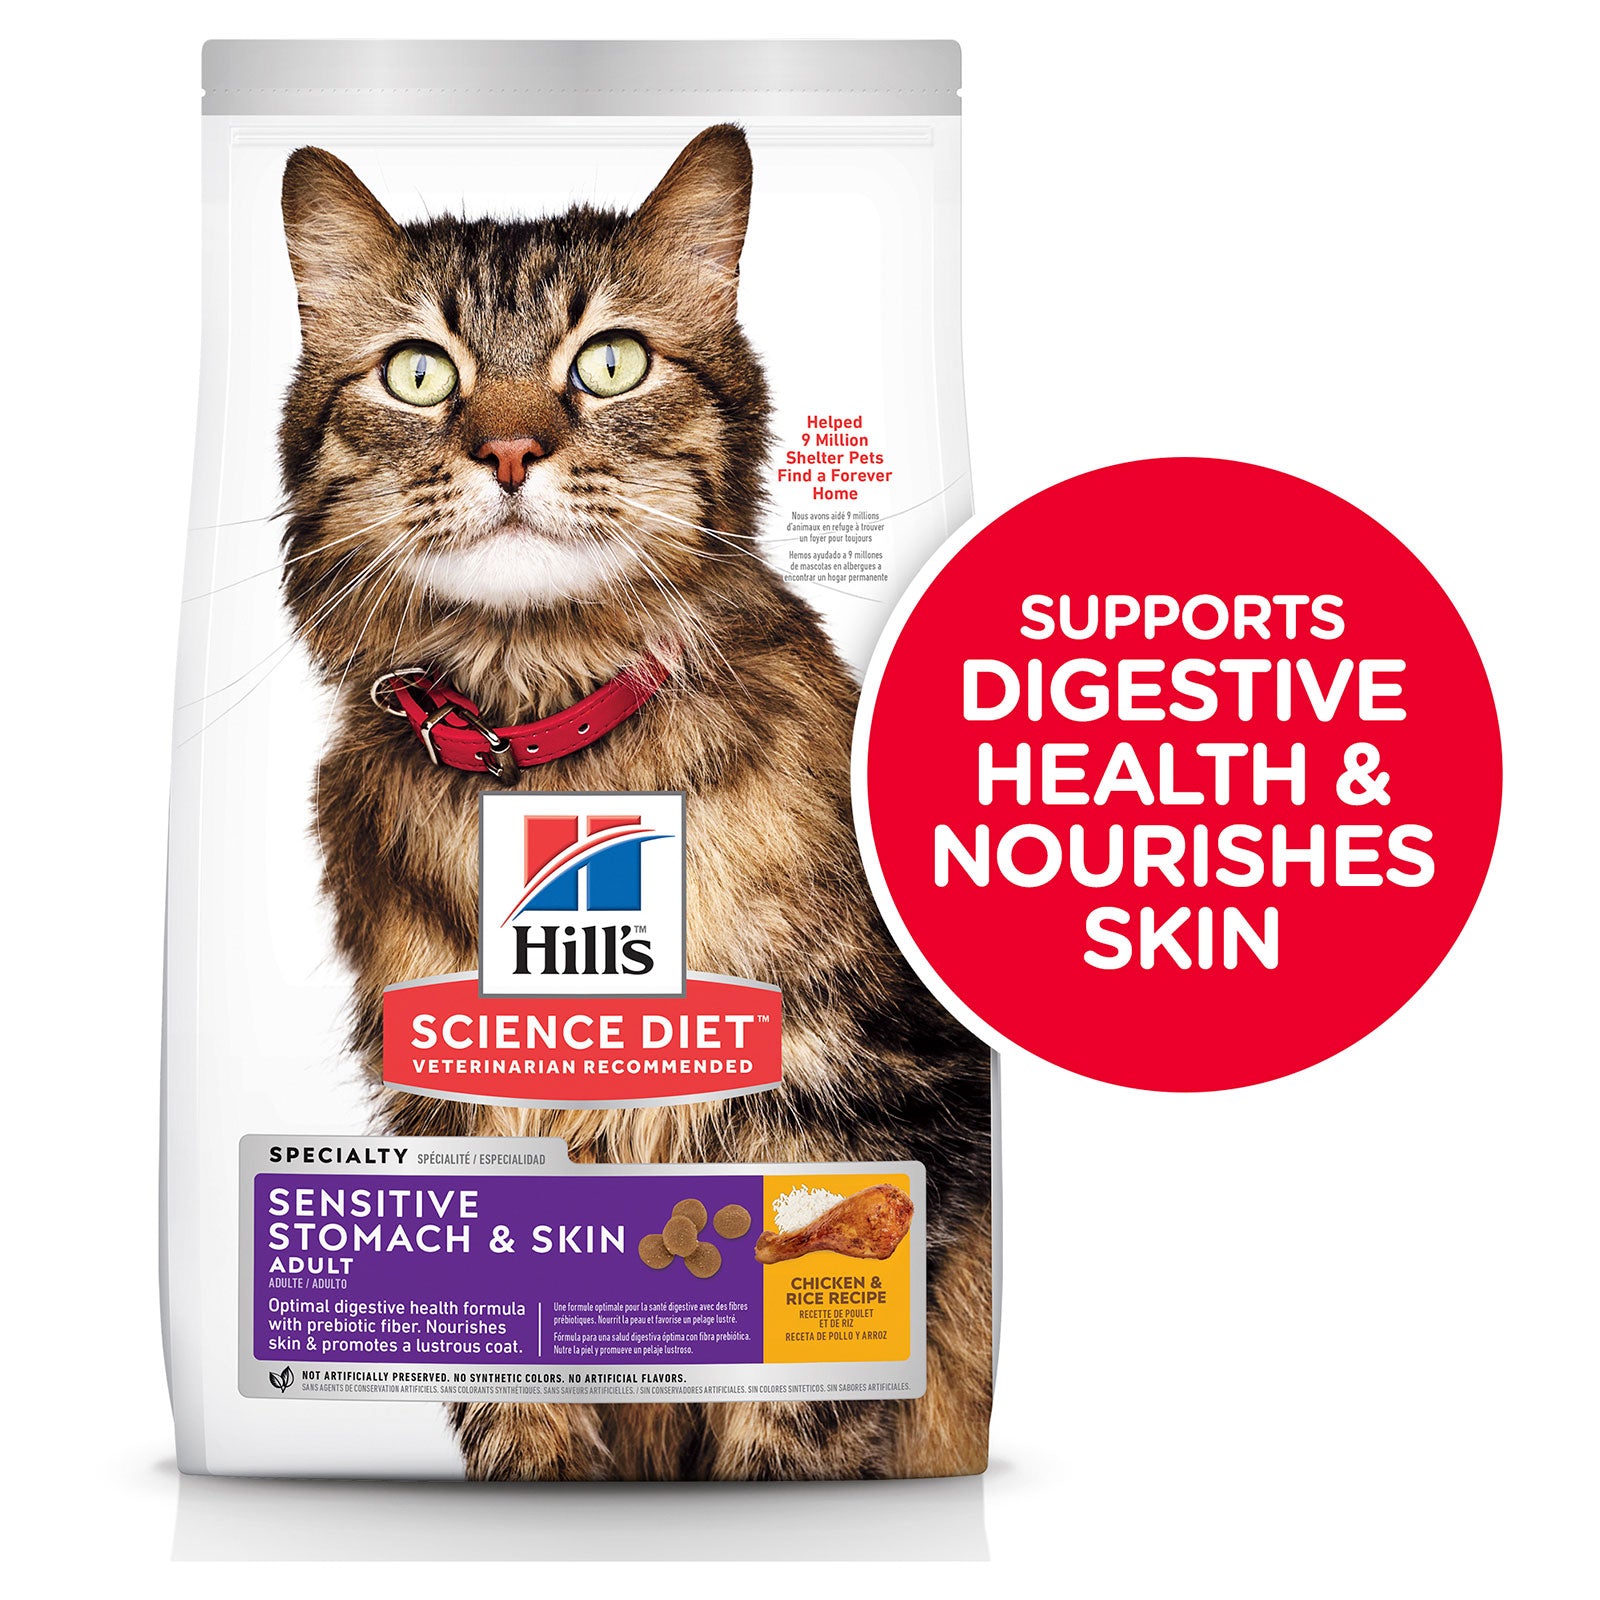 Hill's Science Diet Cat Food Adult Sensitive Stomach & Skin